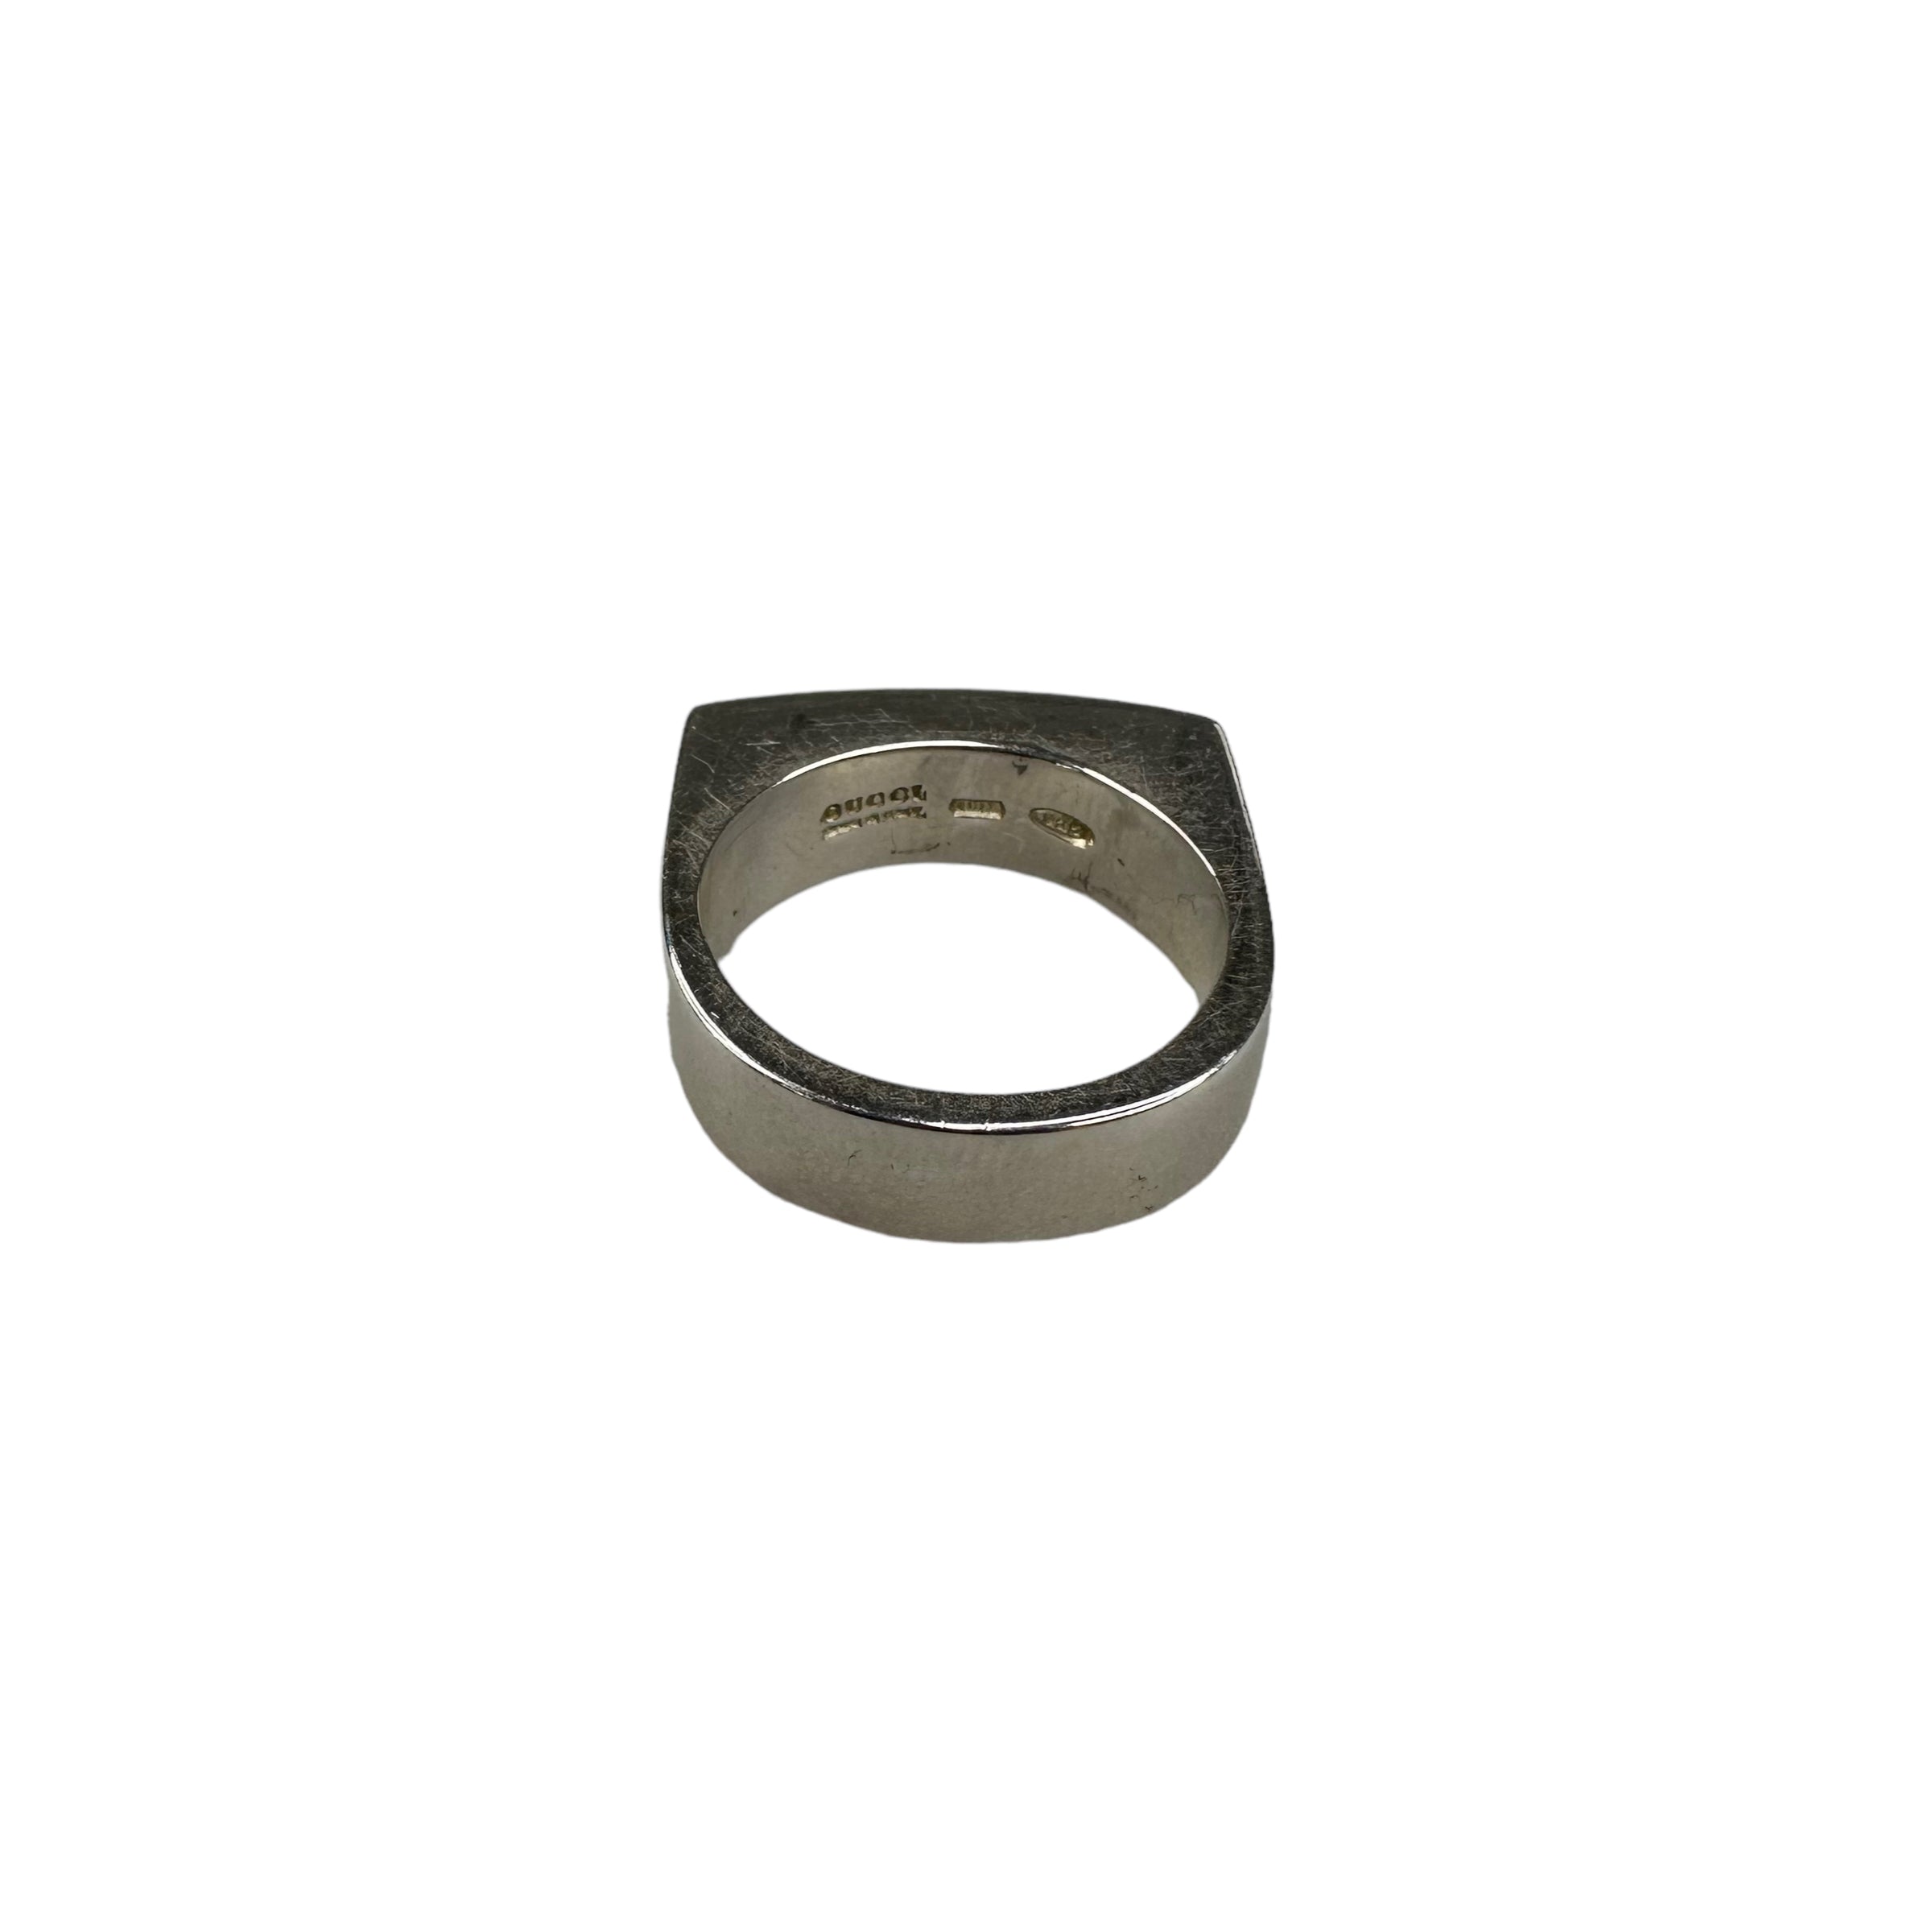 GUCCI STERLING SILVER RING